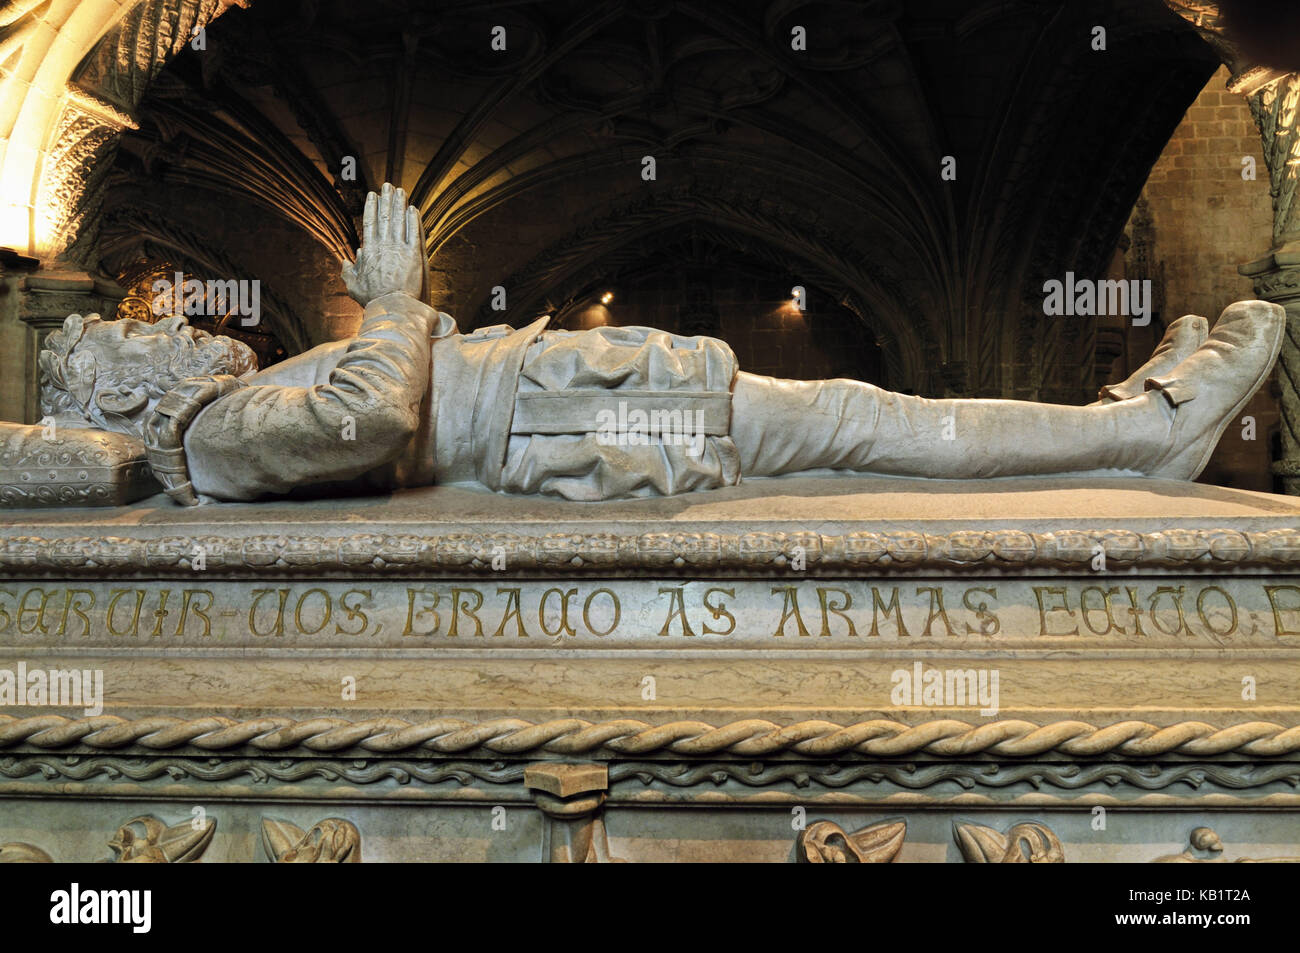 Portugal, Lisbon, tomb of the national poet Luiz Vaz de Camoes in the minster Santa Maria of the Hieronymusklosterr (cloister), Stock Photo